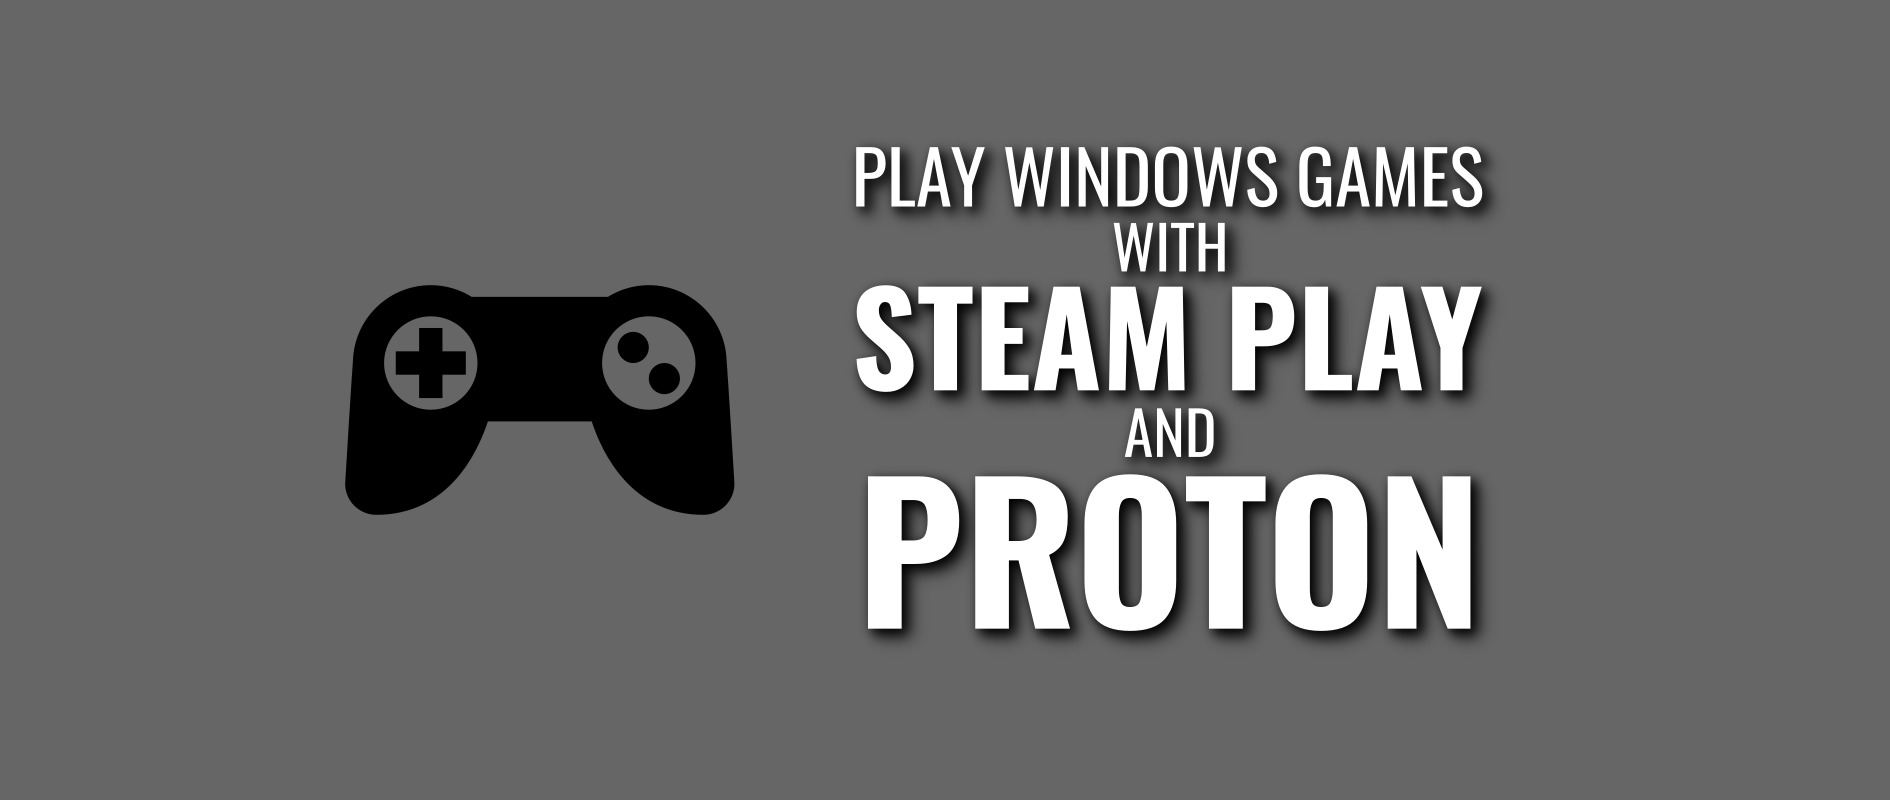 Player 1 win. Steam Proton. Steam Play. Виндовс плей. Play to win.